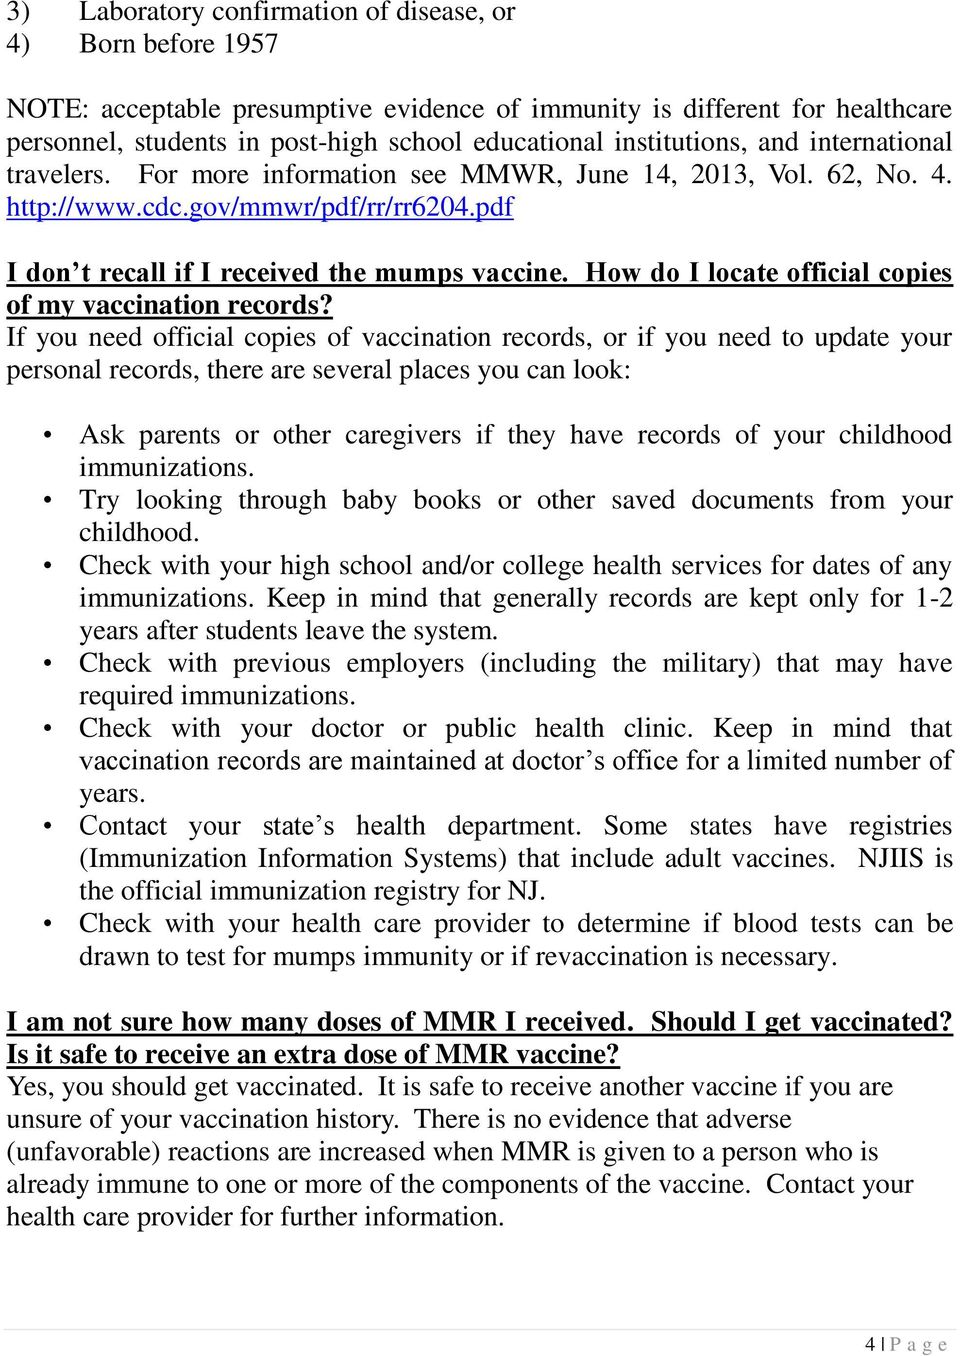 How do I locate official copies of my vaccination records?